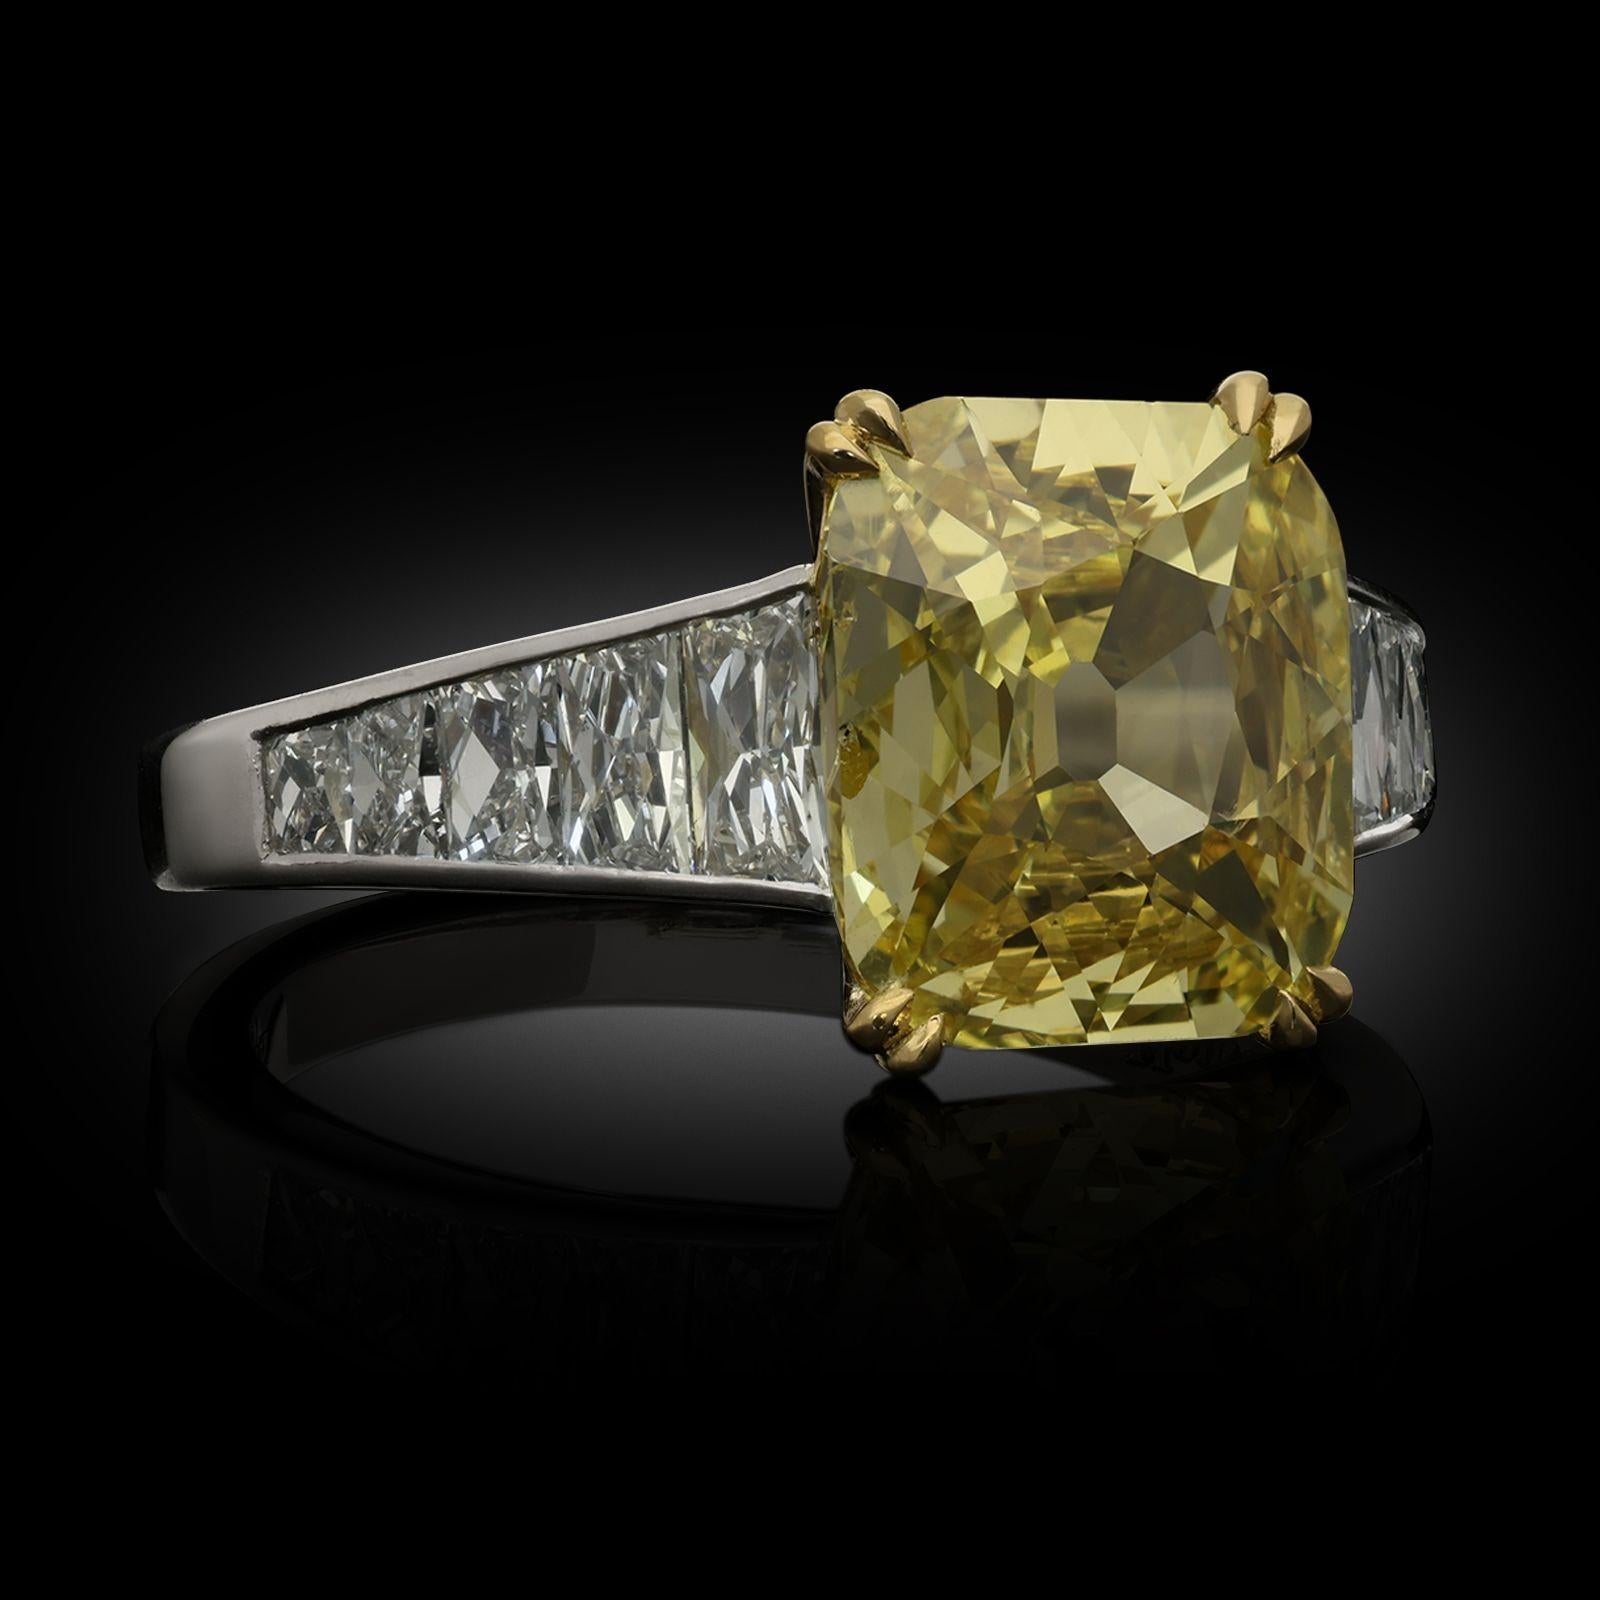 A beautiful fancy intense yellow diamond and diamond ring by Hancocks, centred with an old cushion cut diamond weighing 2.56cts and of fancy intense yellow colour and I1 clarity claw set in 18ct yellow gold between elegantly tapering shoulders